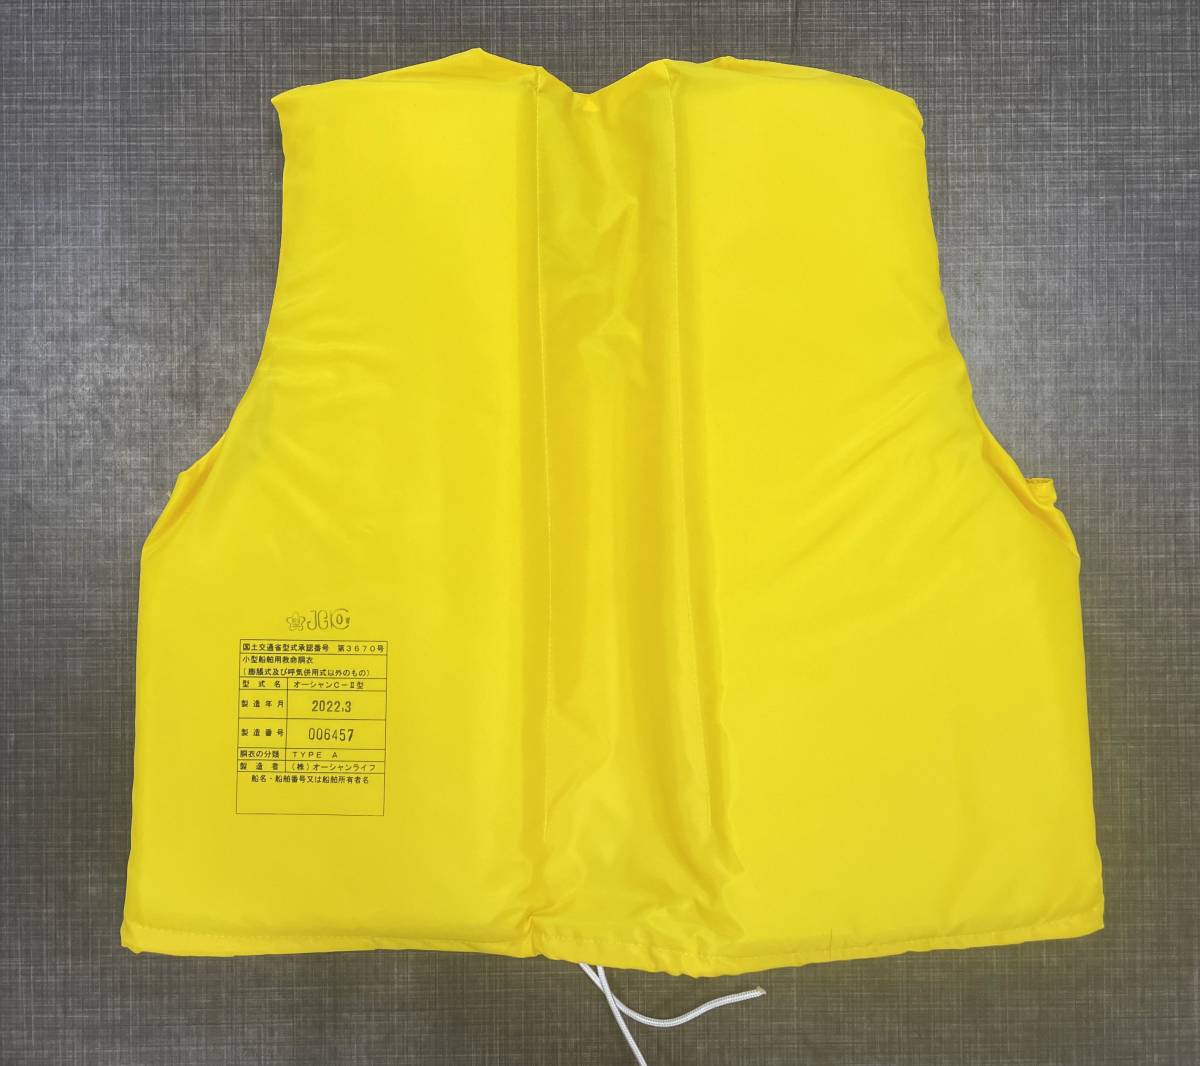 # unused goods # small size for ship life jacket # Ocean C-Ⅱ type #TYPE A# yellow #